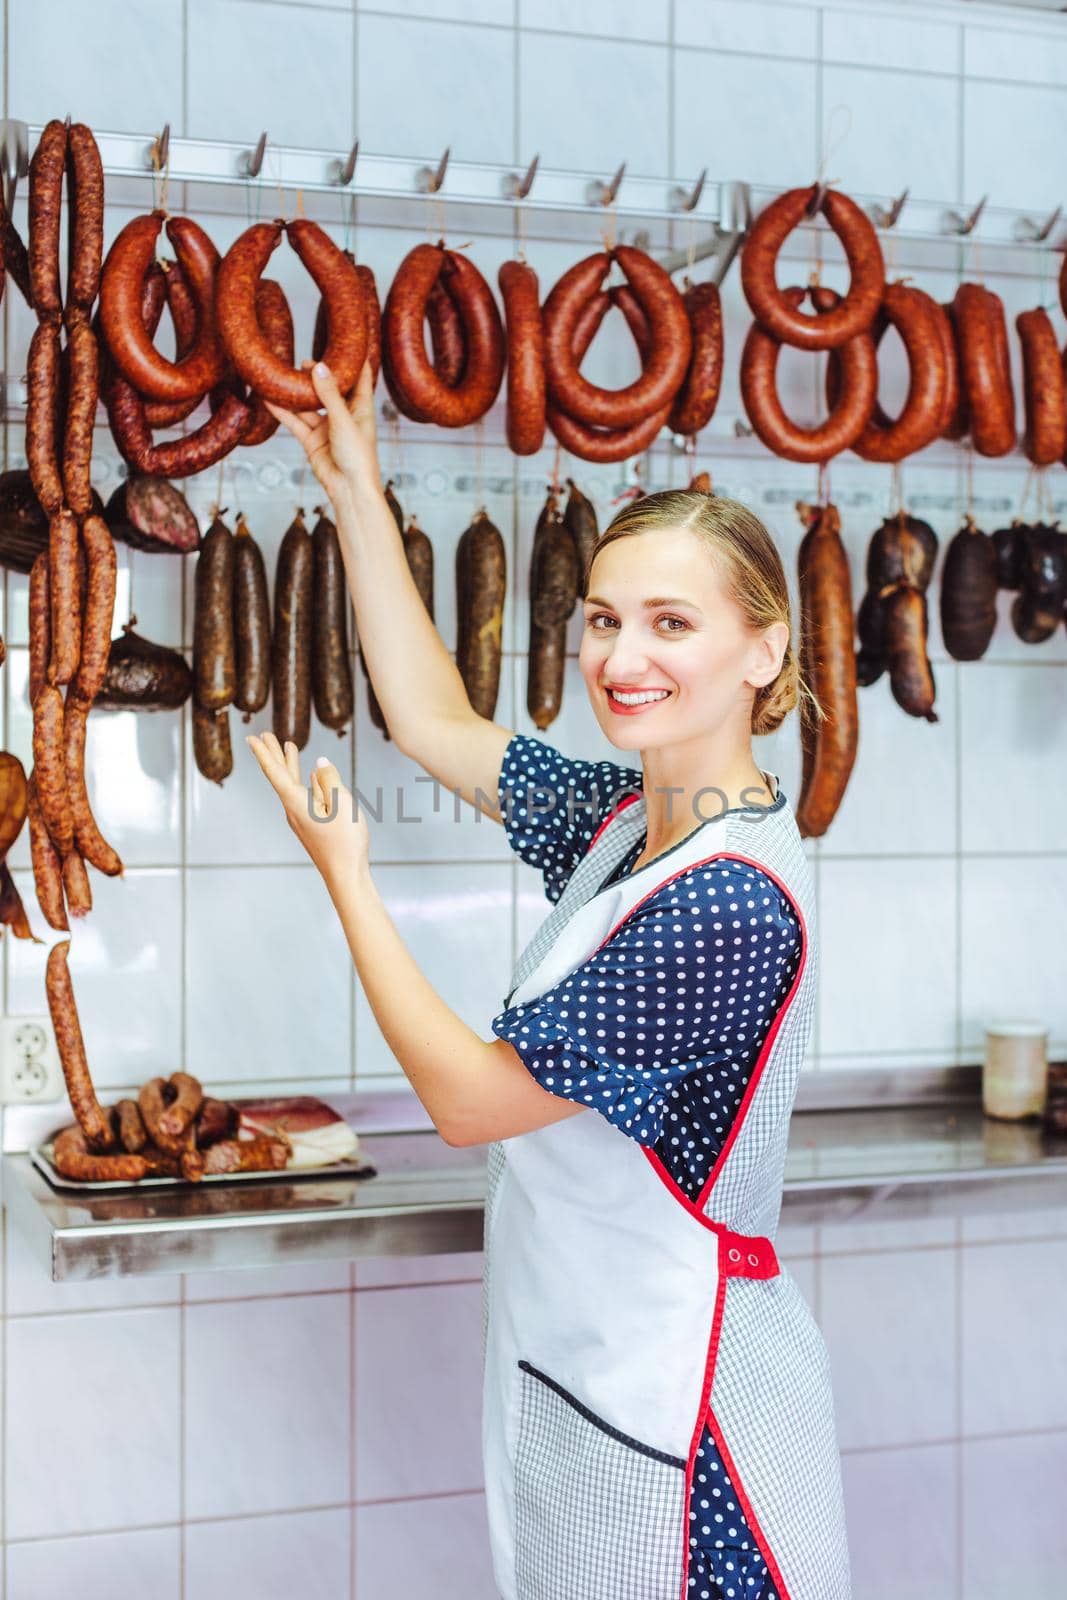 Woman actively recommending sausages in her butchery shop taking them from the hook